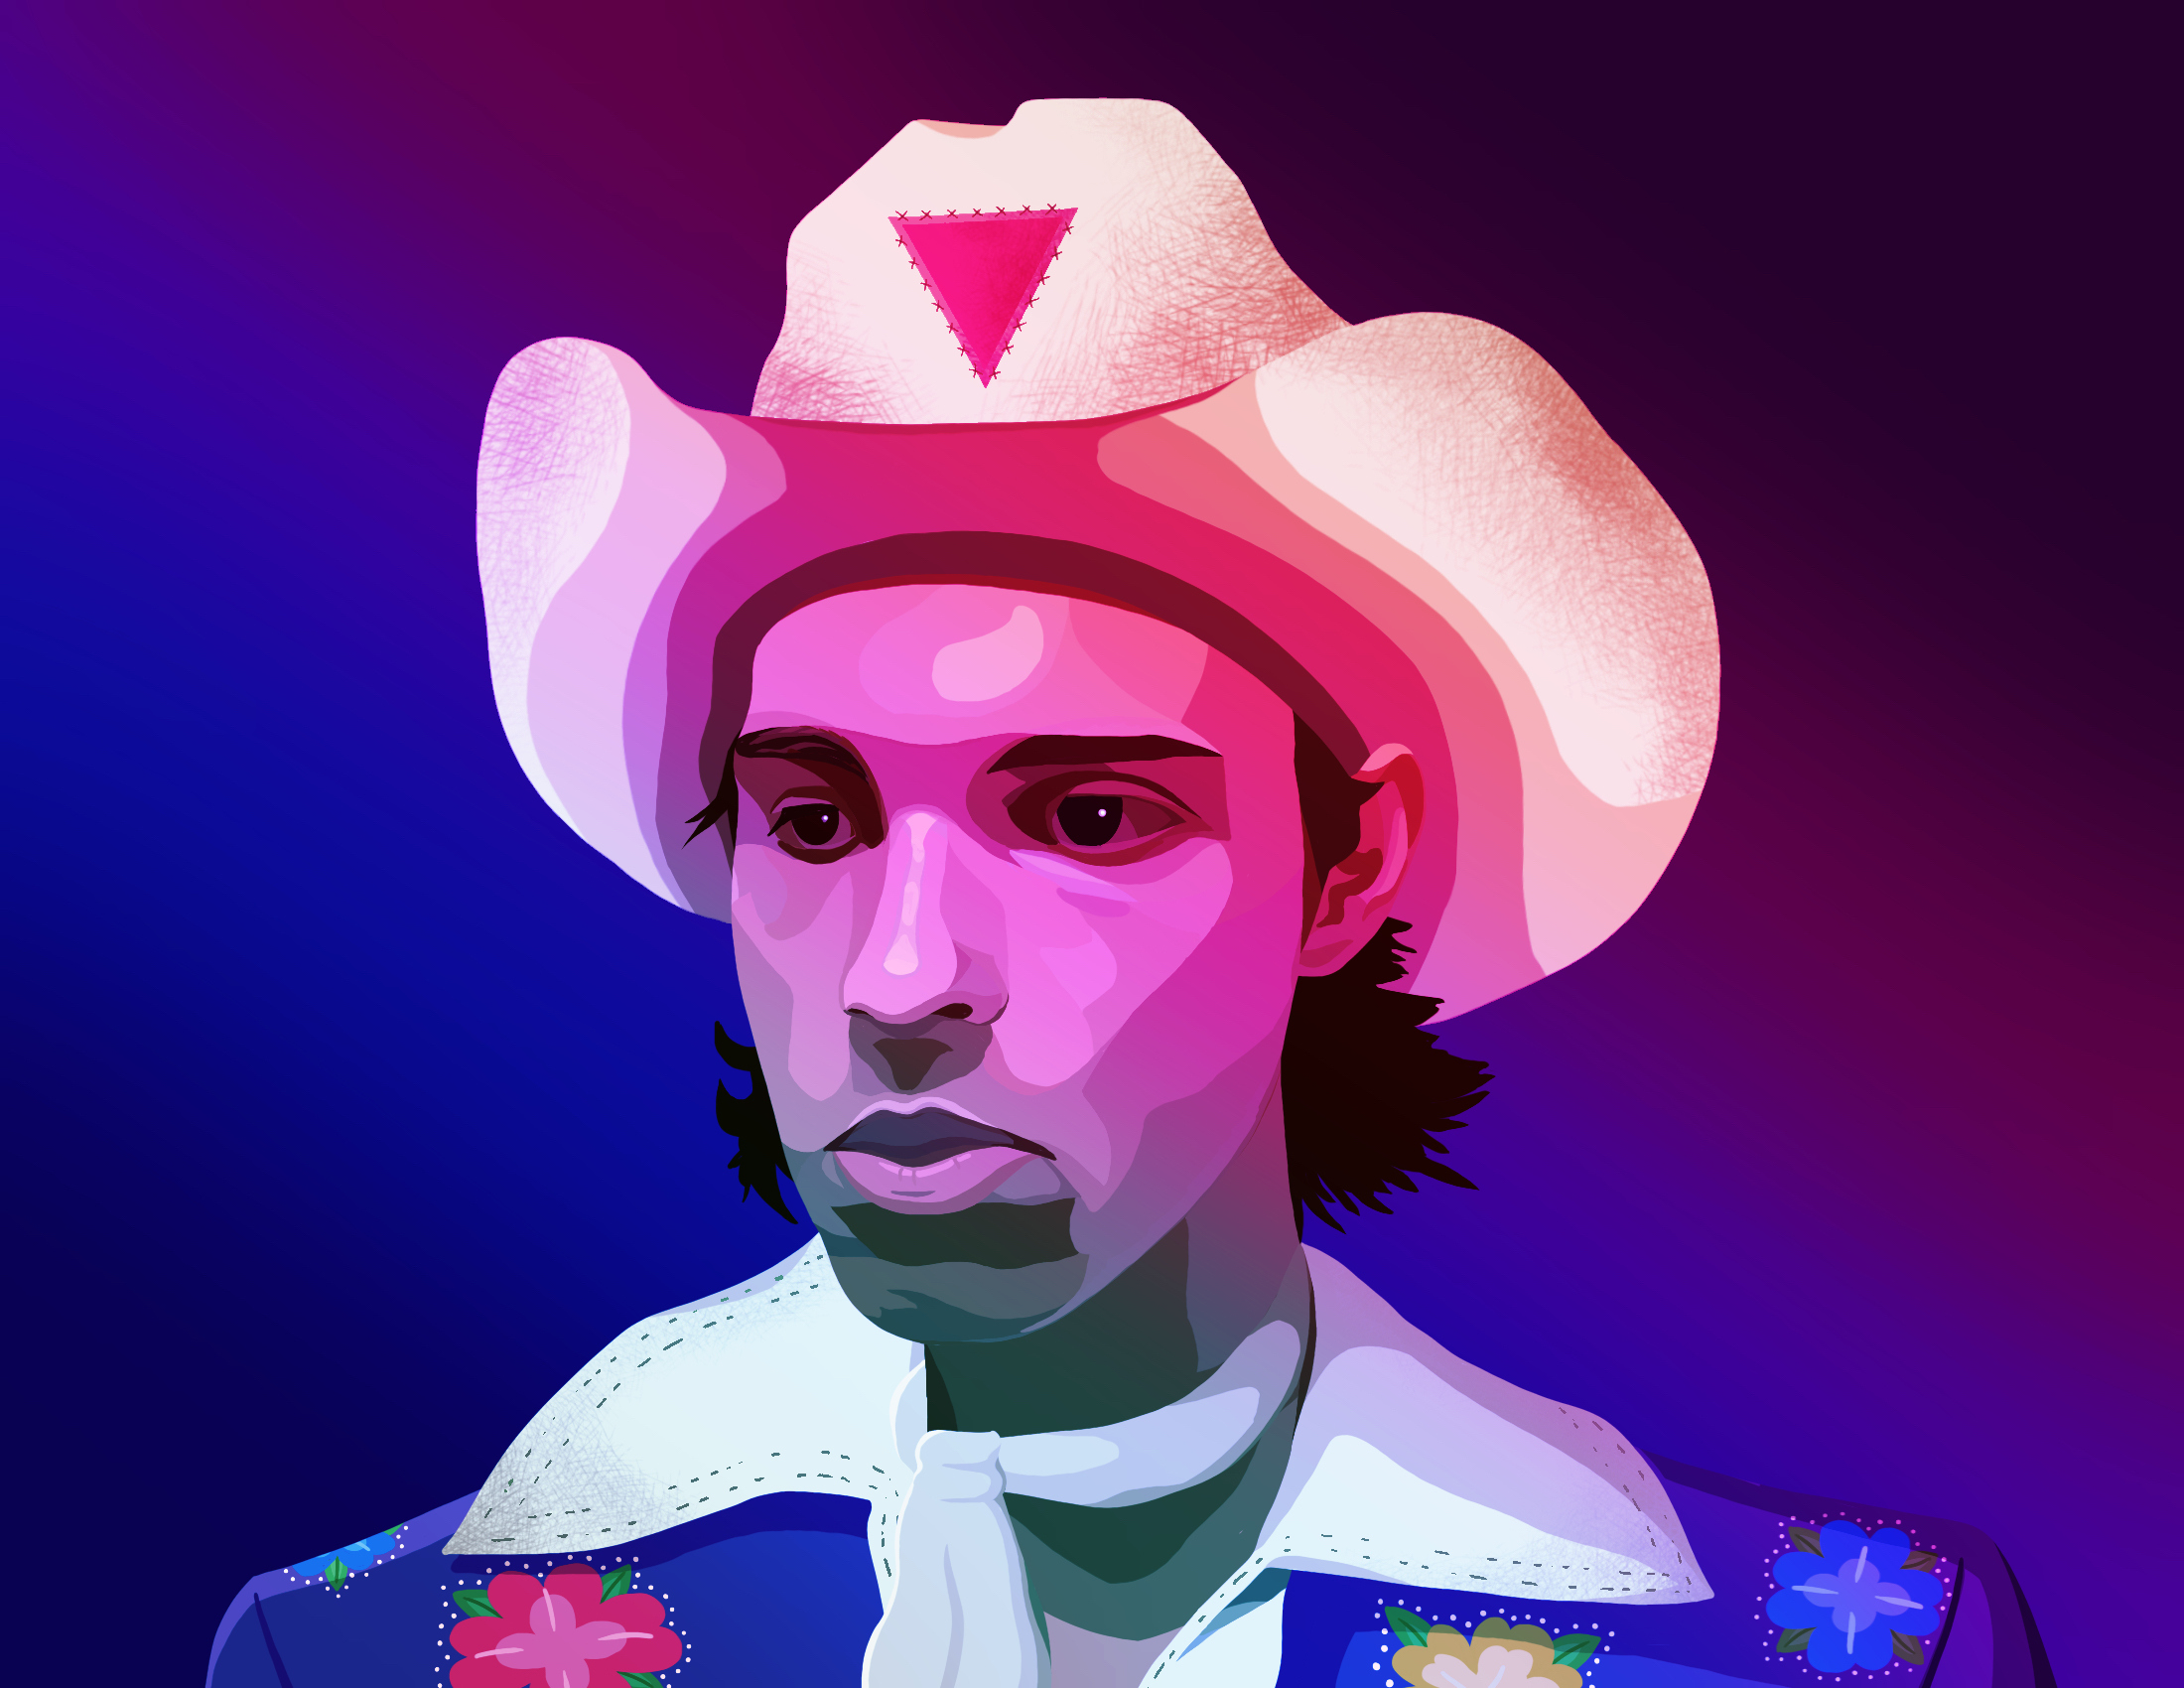 a digital illustration of Jackson, a white man with long, brown hair staring off to right wearing purple jacket with a flower pattern and white collar, a white scarf, and a white cowboy hat with an upside down pink triangle stitched in the middle. From left to right, the background fades from dark blue, light blue, purple, red, and dark purple